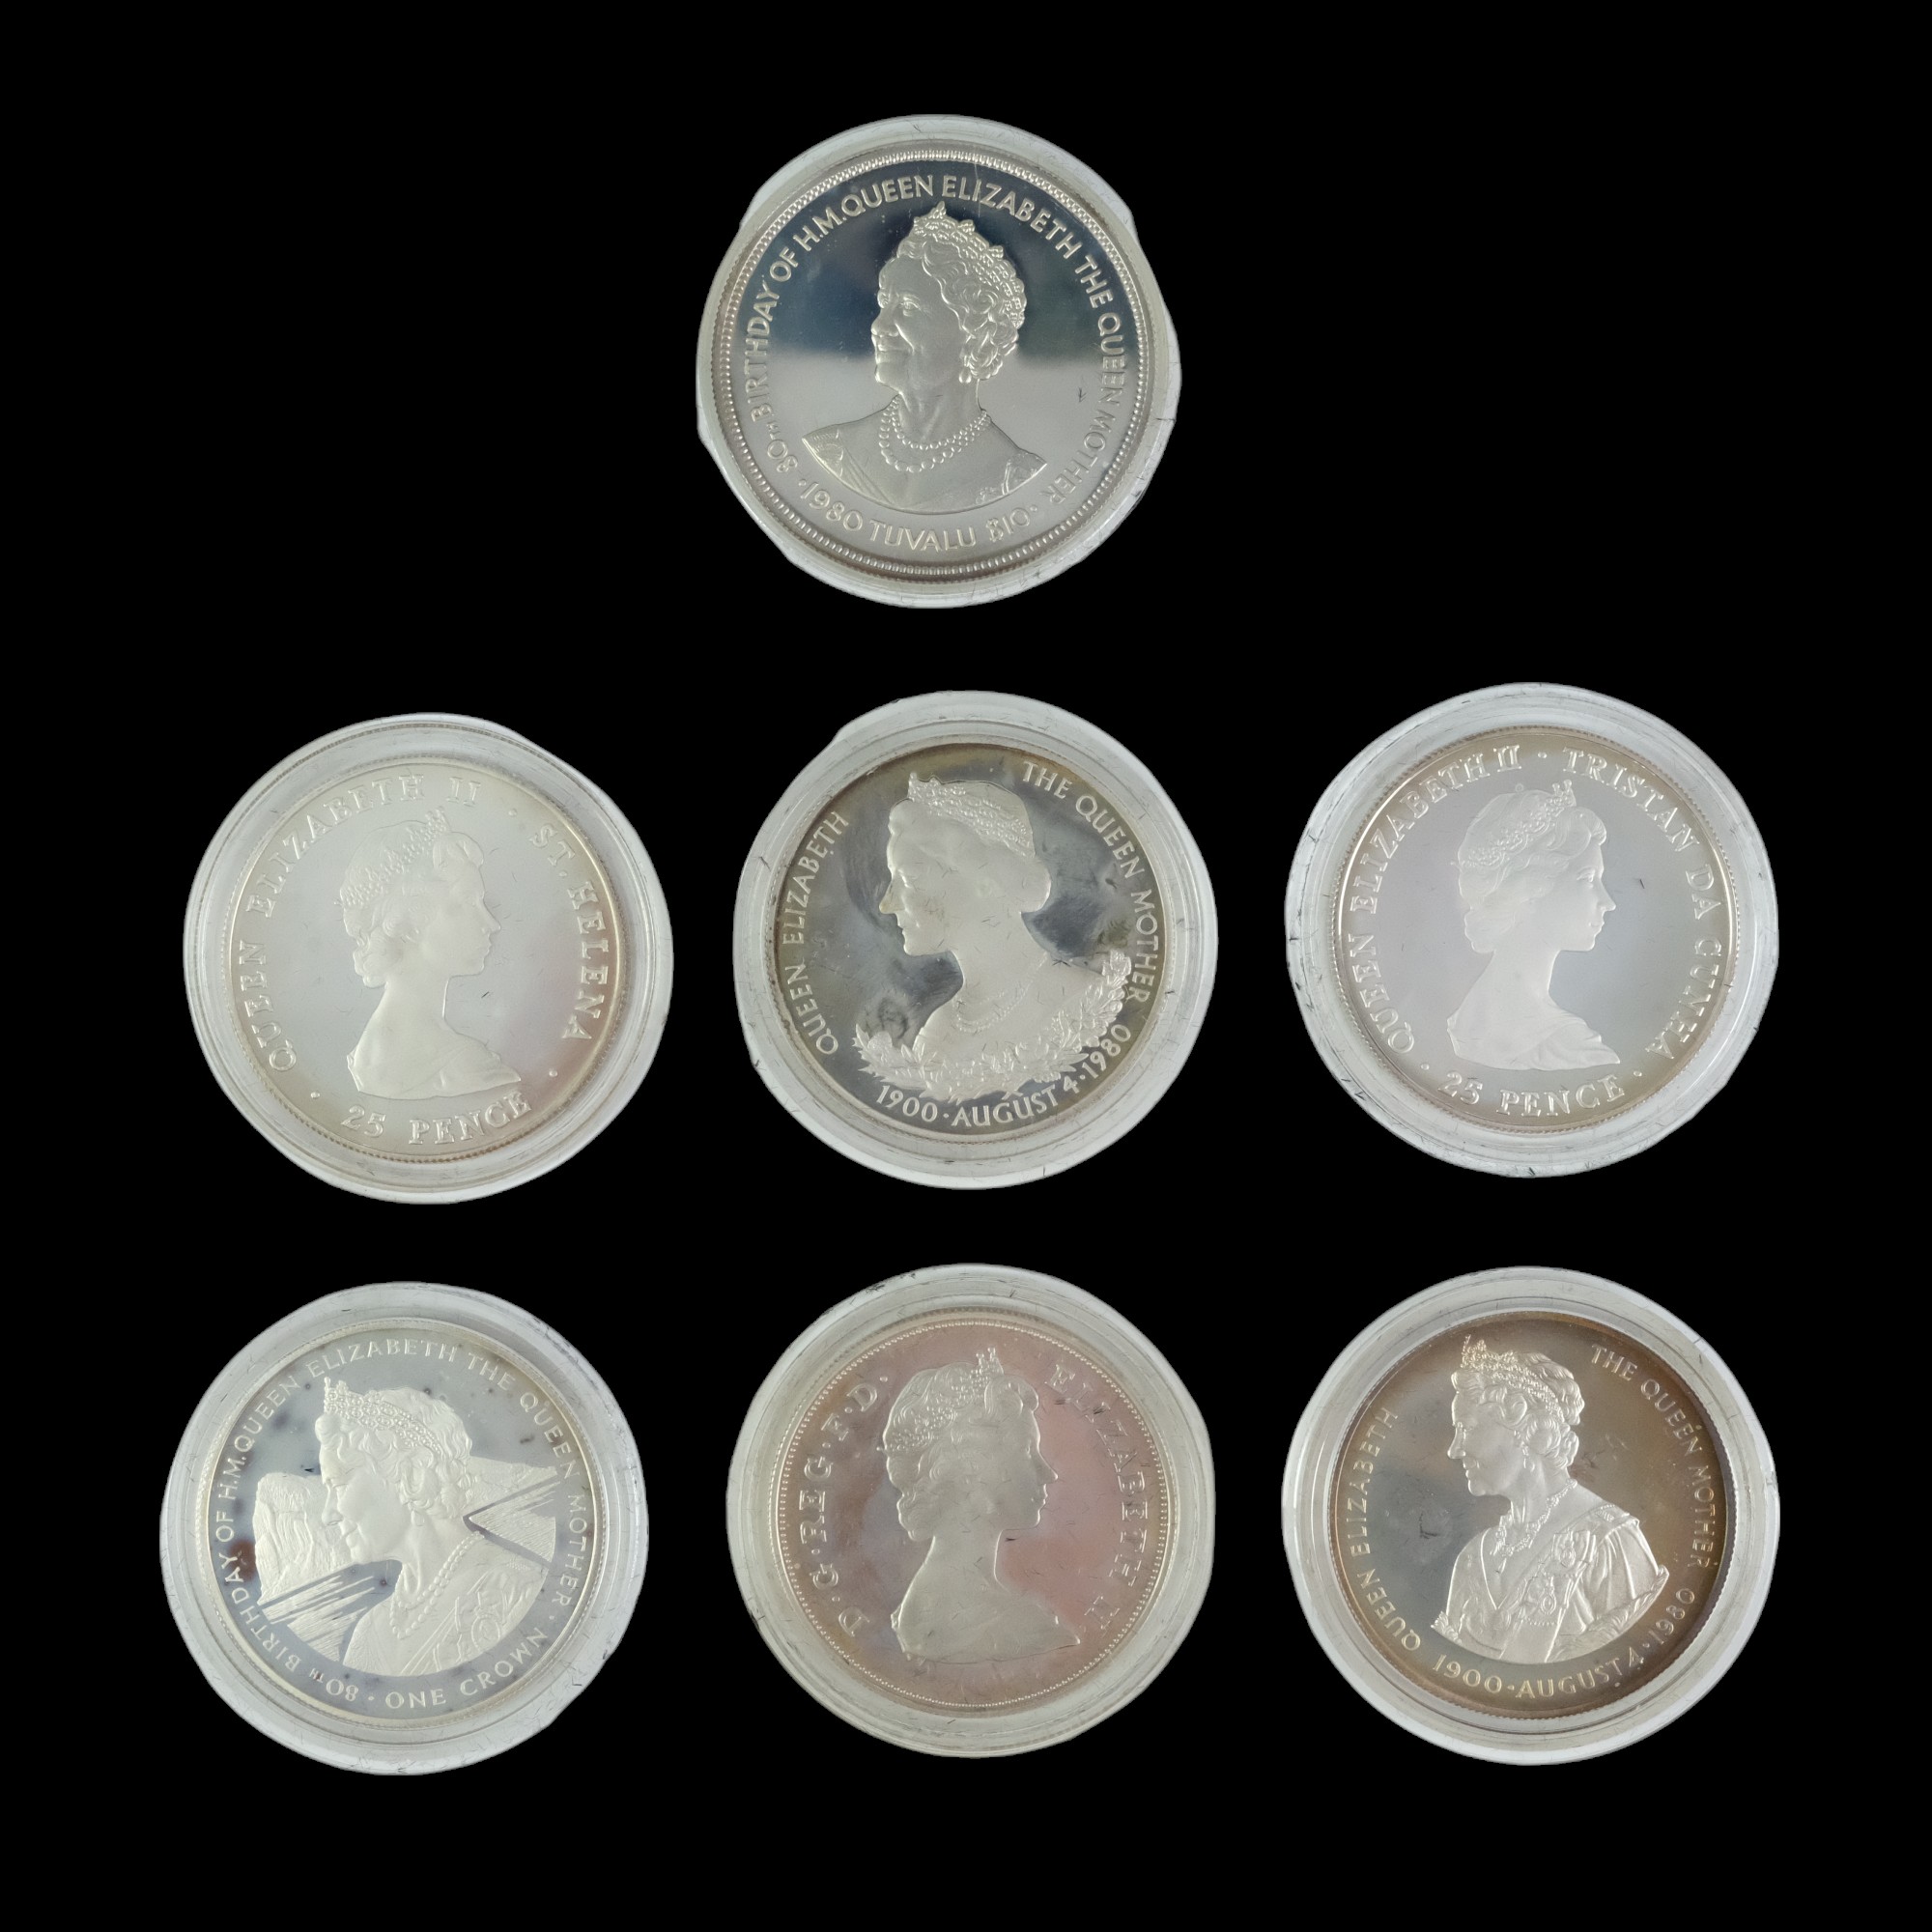 A Royal Mint 1980 Her Majesty Queen Elizabeth the Queen Mother 1 oz coin collection - Image 2 of 10